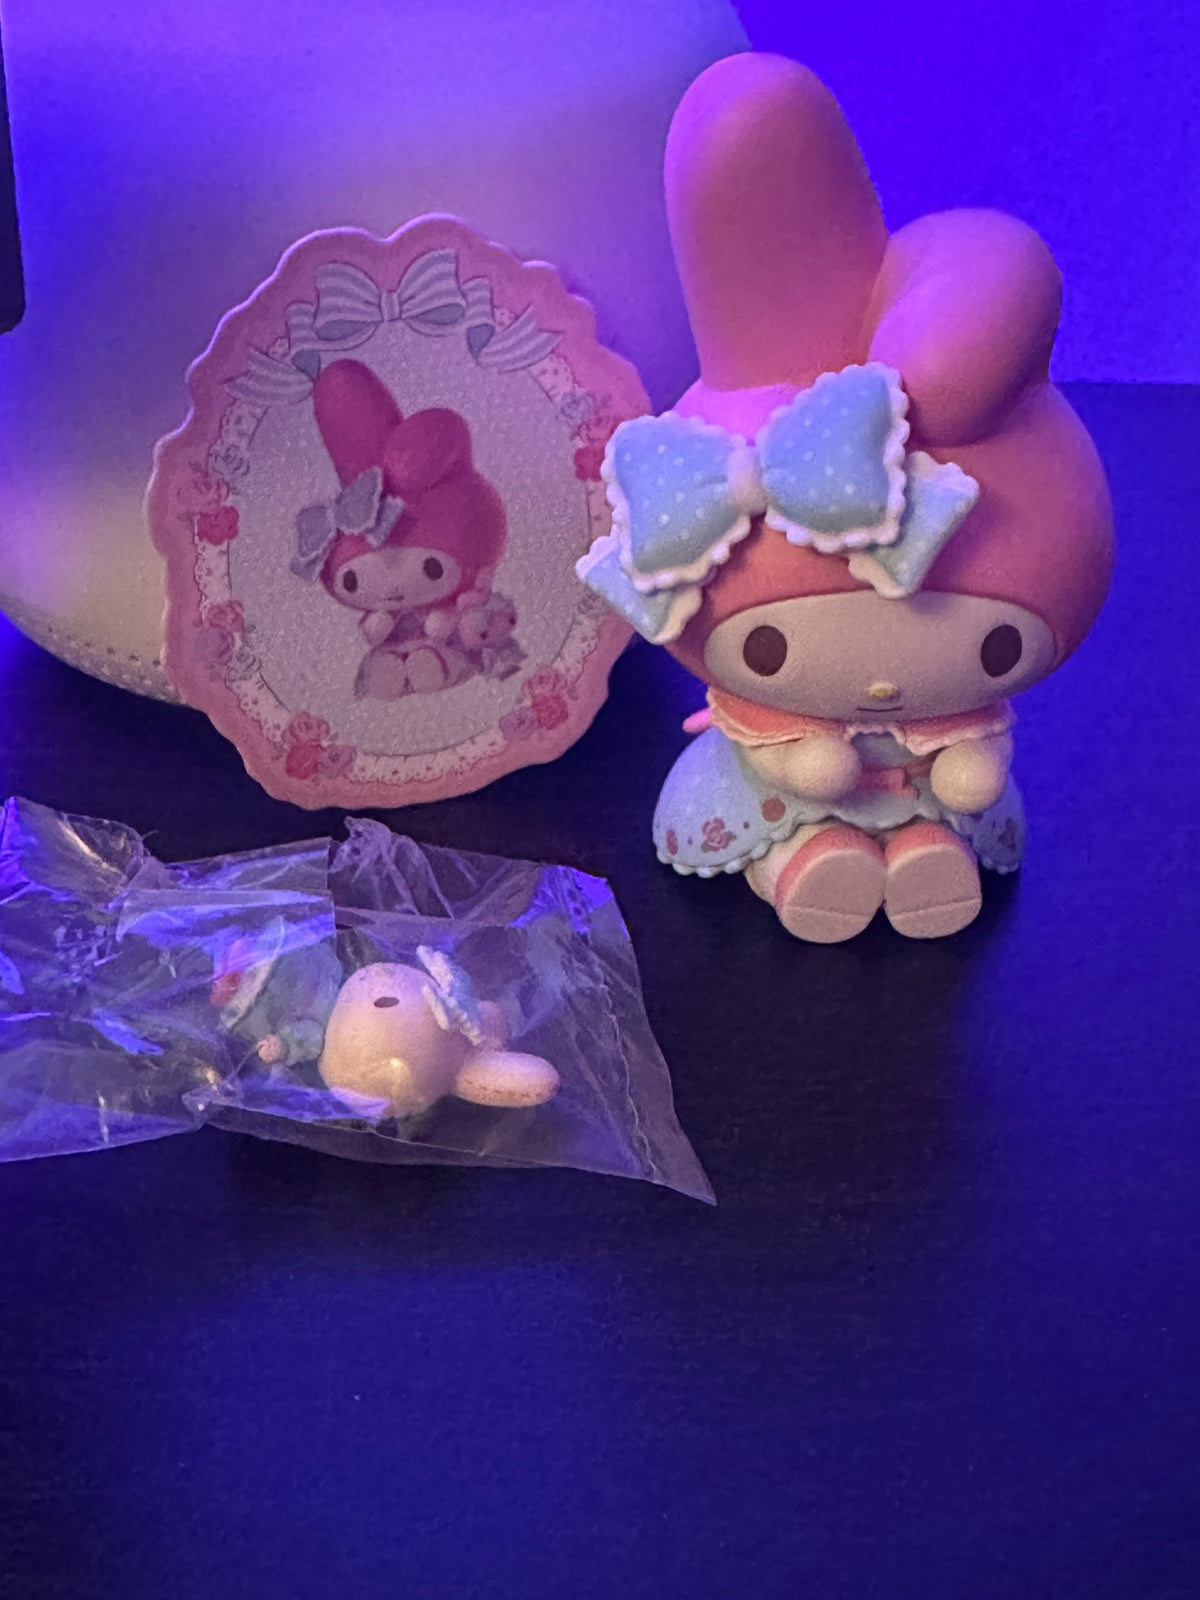 My Melody with Little White Bunny in Blue Dress - Sanrio My Melody Secret Forest Tea Party Series By Sanrio X Miniso - 1